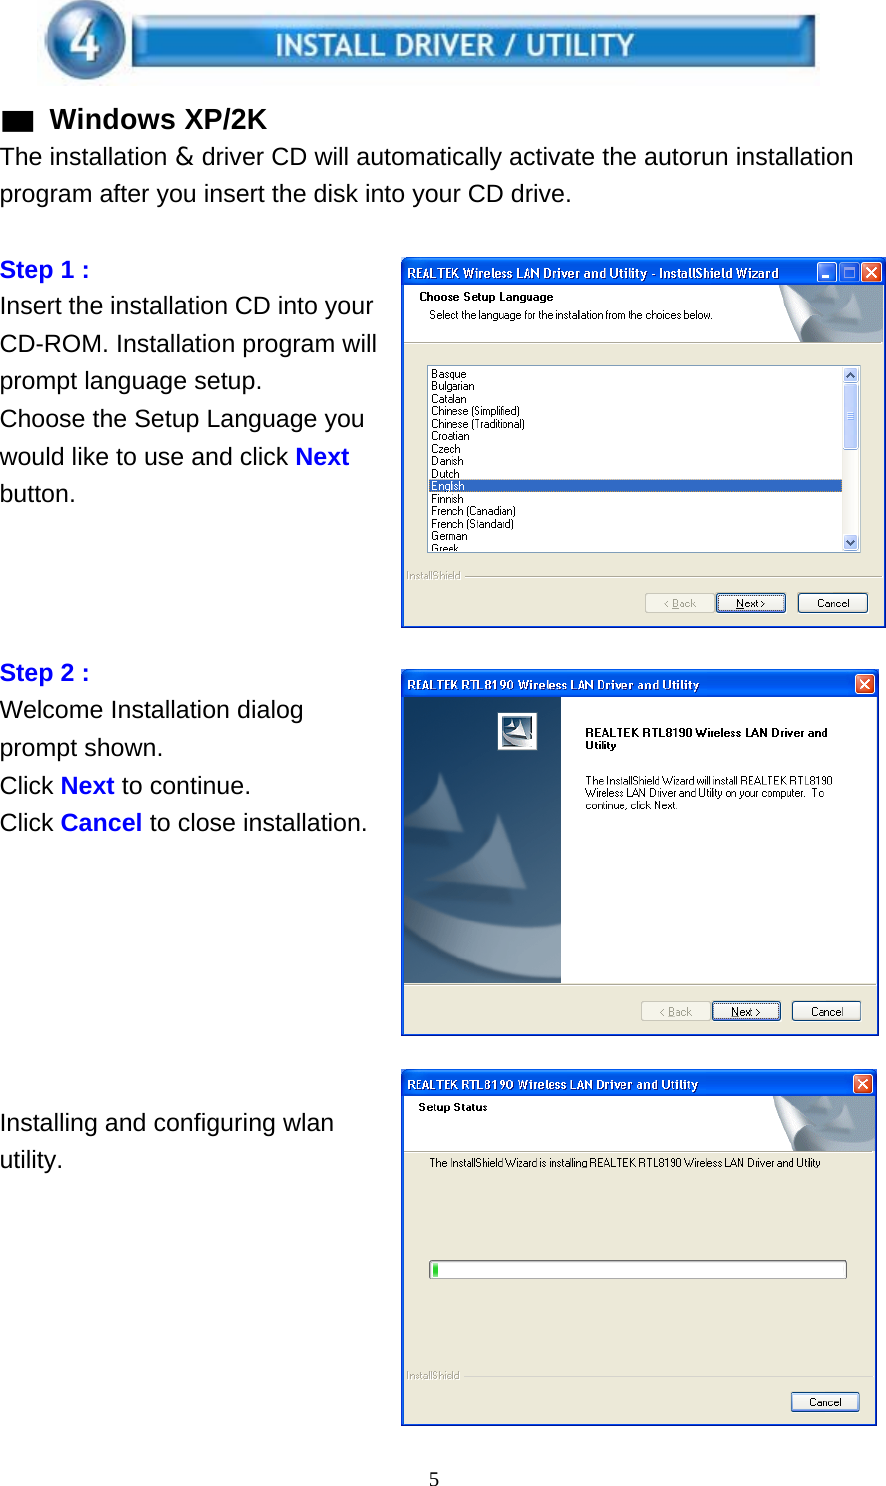 5    ▓ Windows XP/2K The installation &amp; driver CD will automatically activate the autorun installation program after you insert the disk into your CD drive.   Step 1 : Insert the installation CD into your CD-ROM. Installation program will prompt language setup. Choose the Setup Language you would like to use and click Next button.       Step 2 : Welcome Installation dialog prompt shown. Click Next to continue. Click Cancel to close installation.              Installing and configuring wlan utility. 